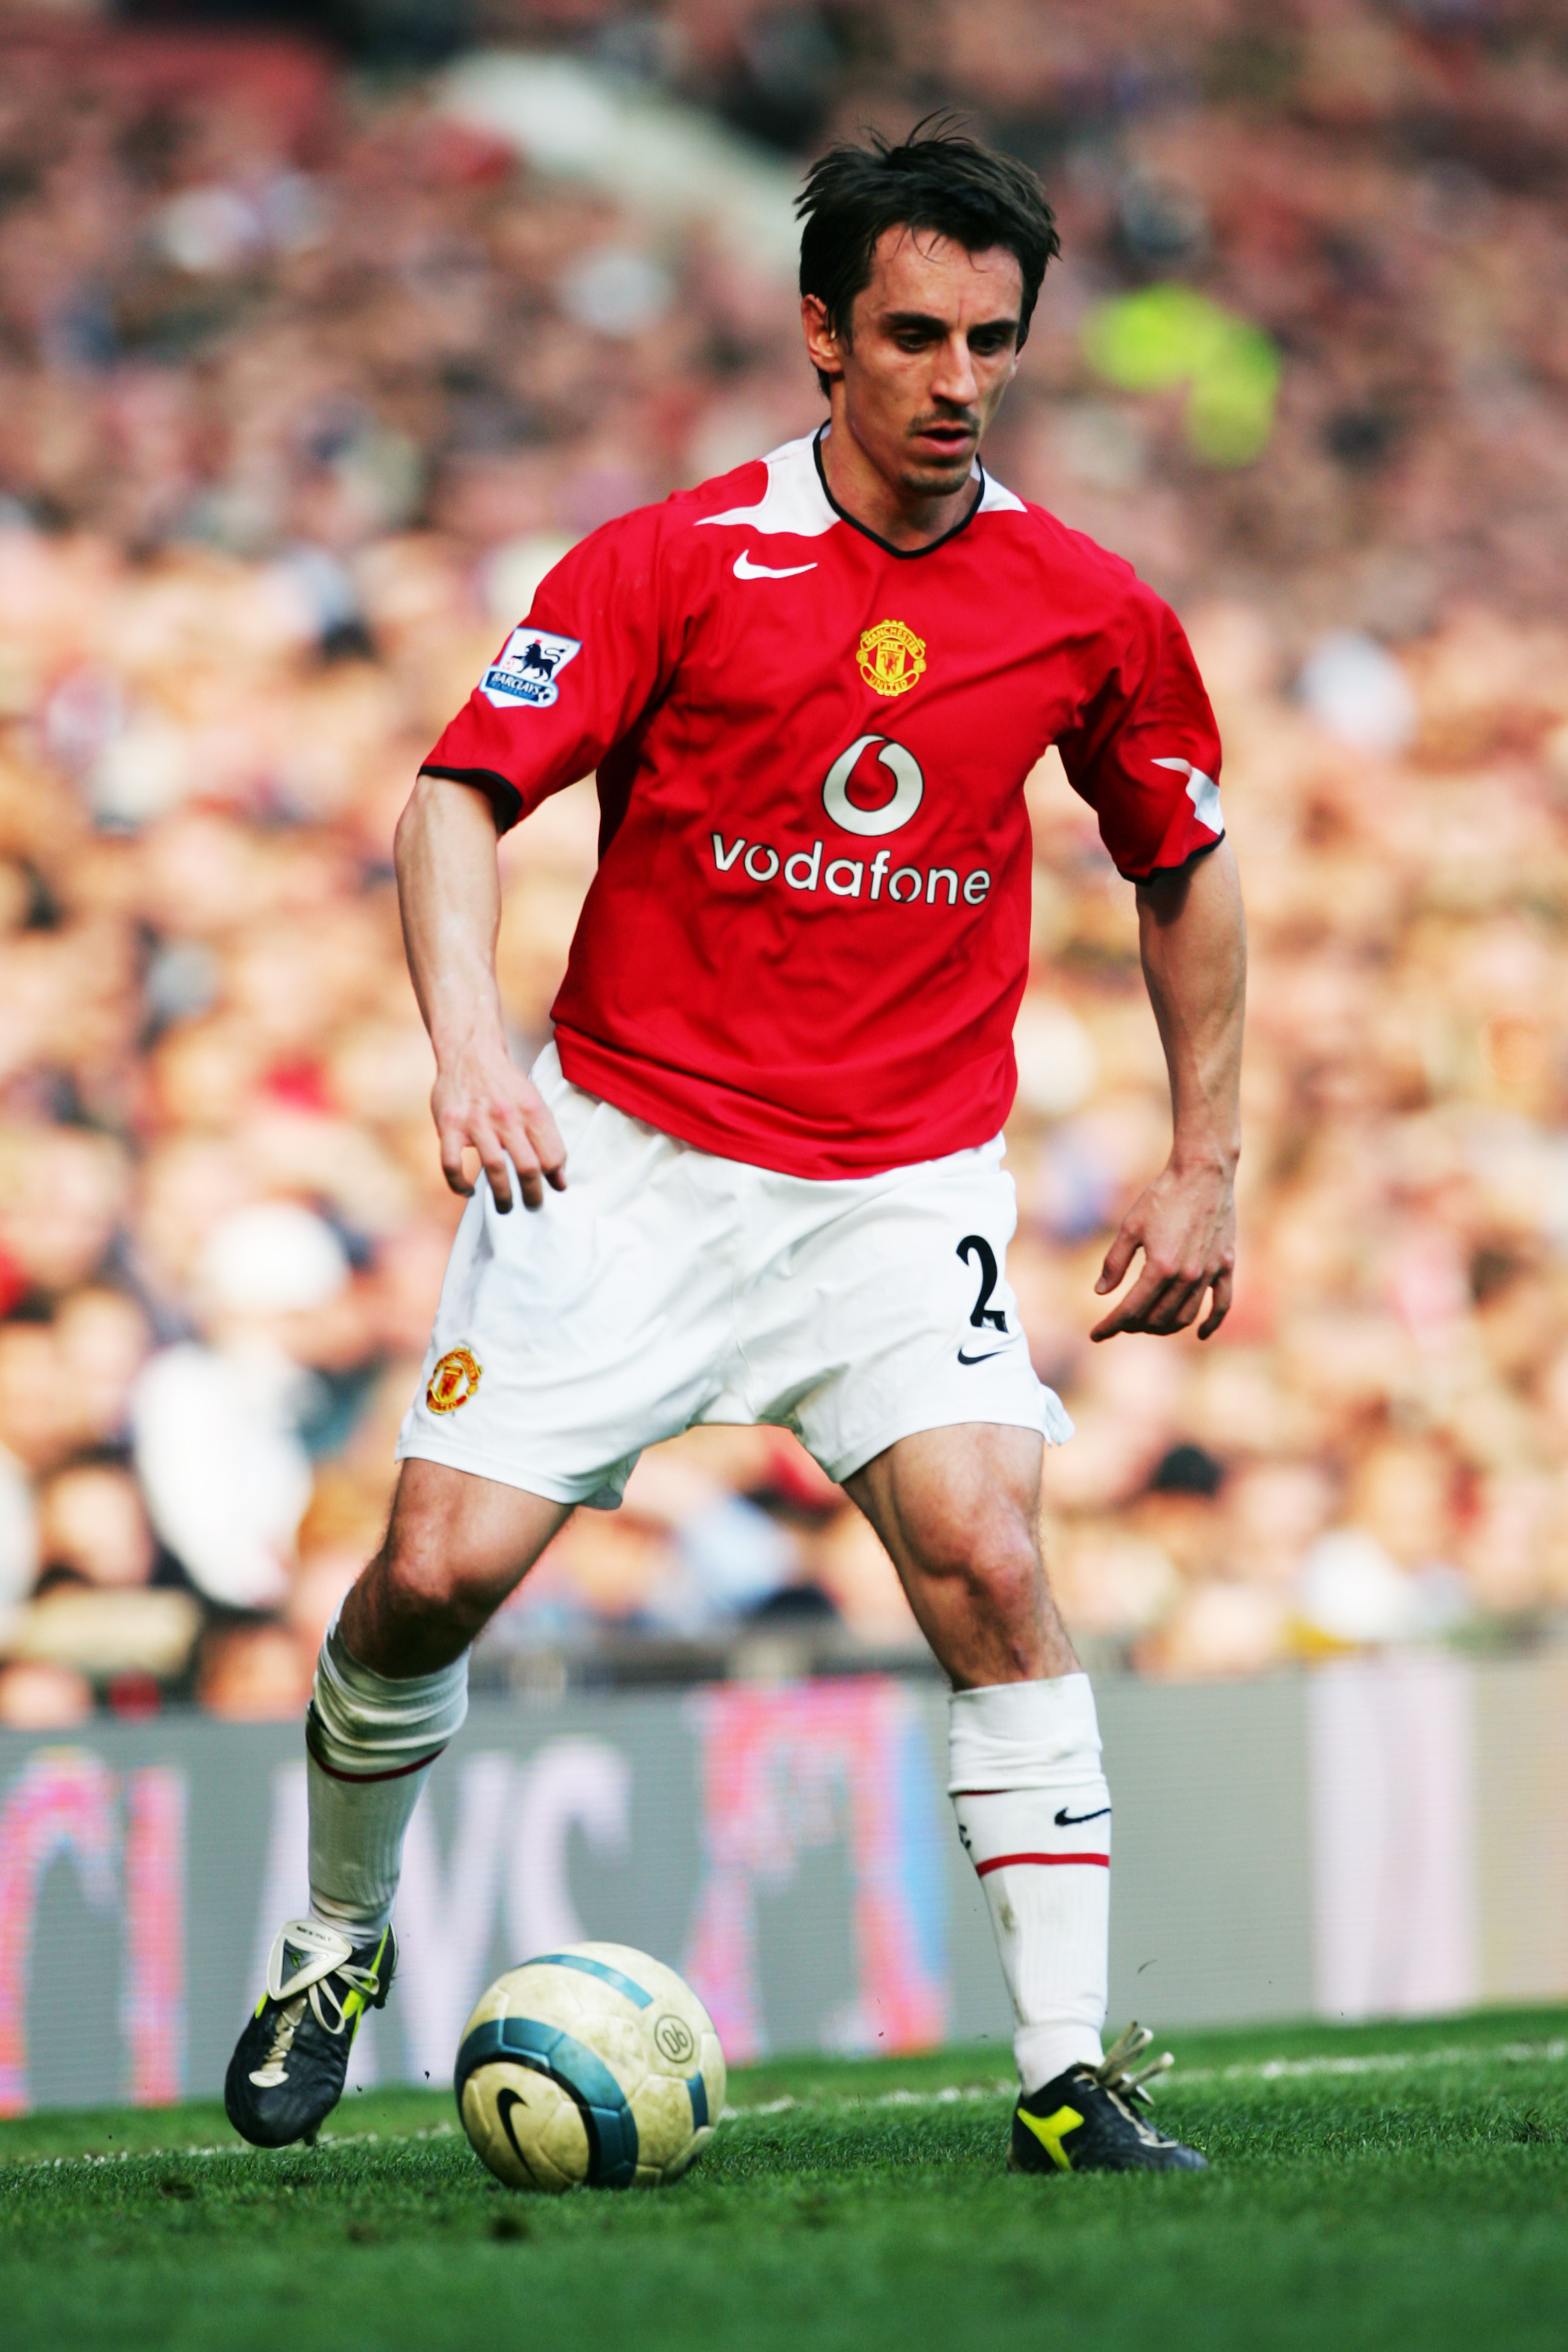 MANCHESTER, ENGLAND - APRIL 2:  Gary Neville of Manchester United in action during the Premier League match between Manchester United and Blackburn Rovers at Old Trafford on April 2, 2005 in Manchester, England.  (Photo by Alex Livesey/Getty Images)